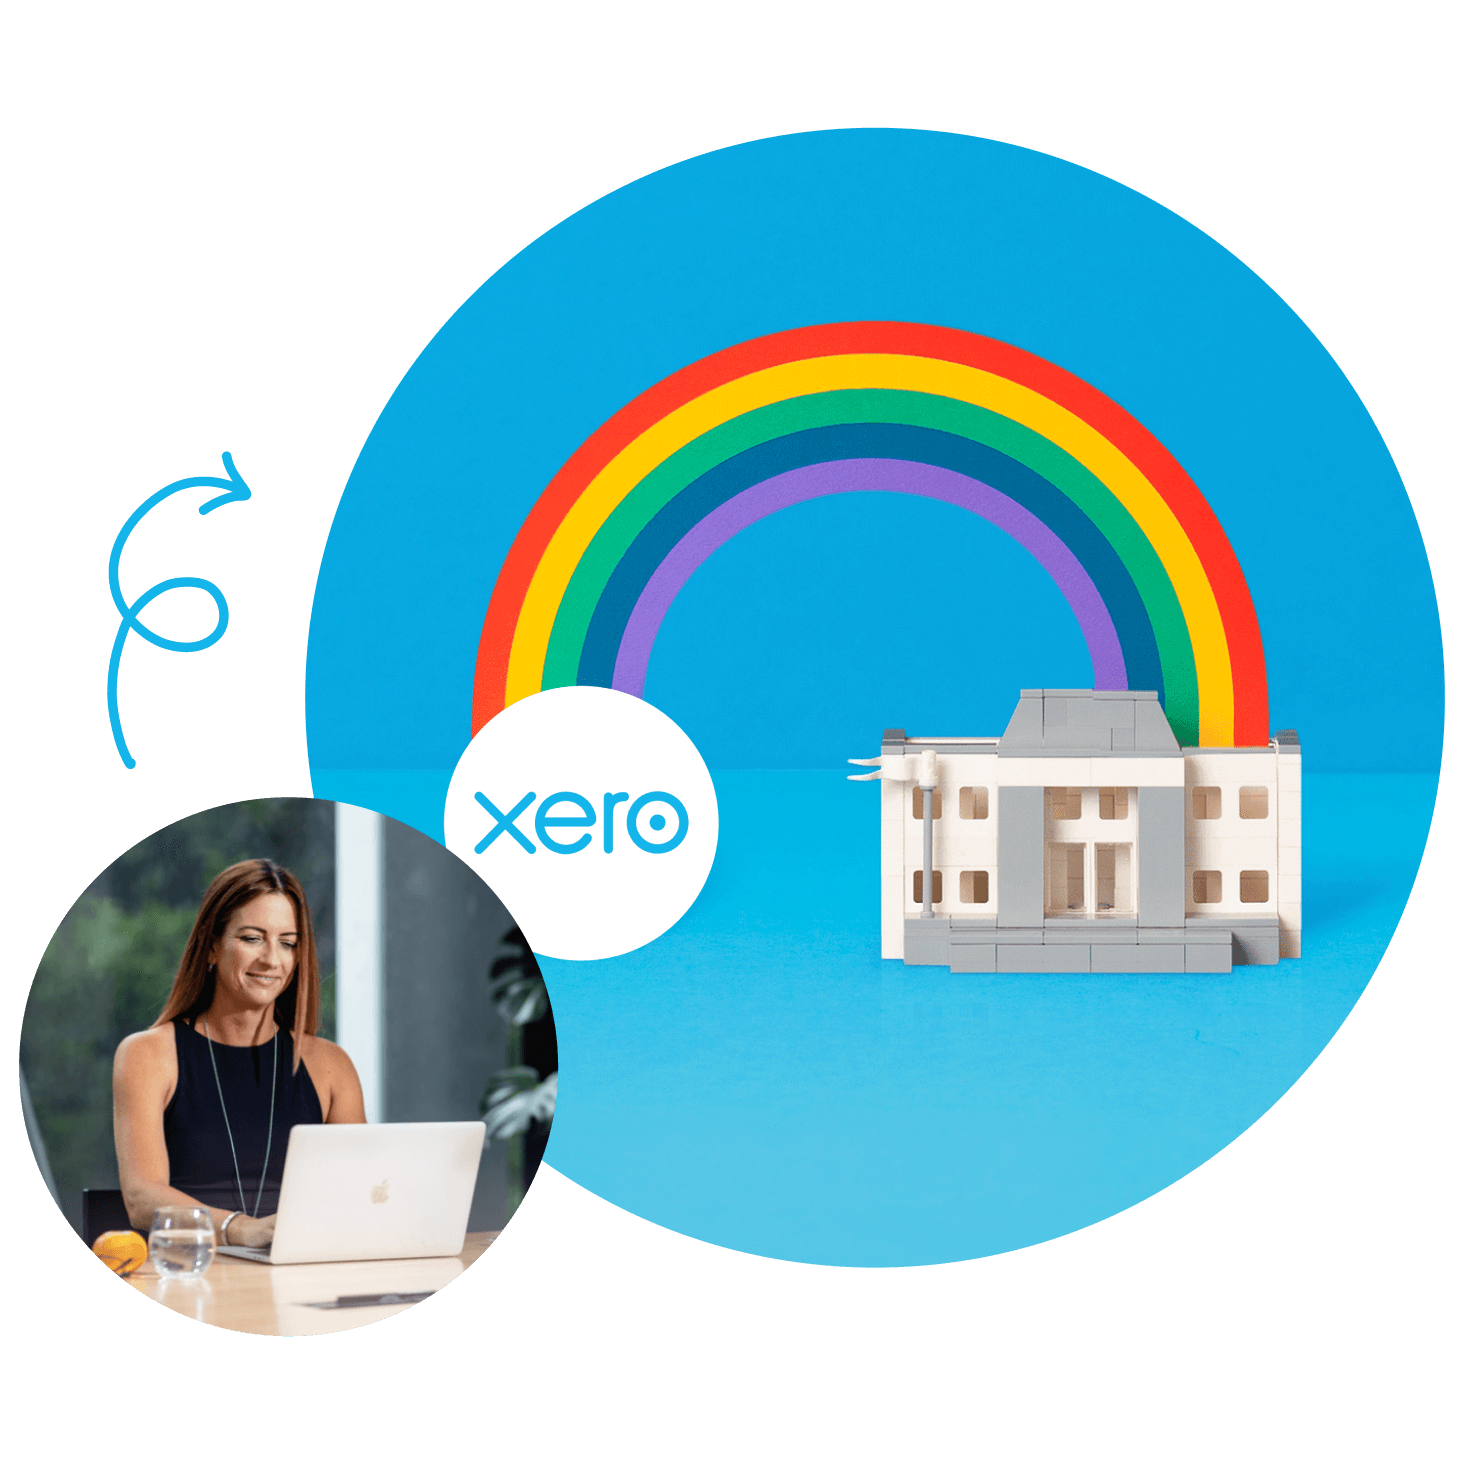 A person downloads Xero office images from the company website to use in a media publication. 